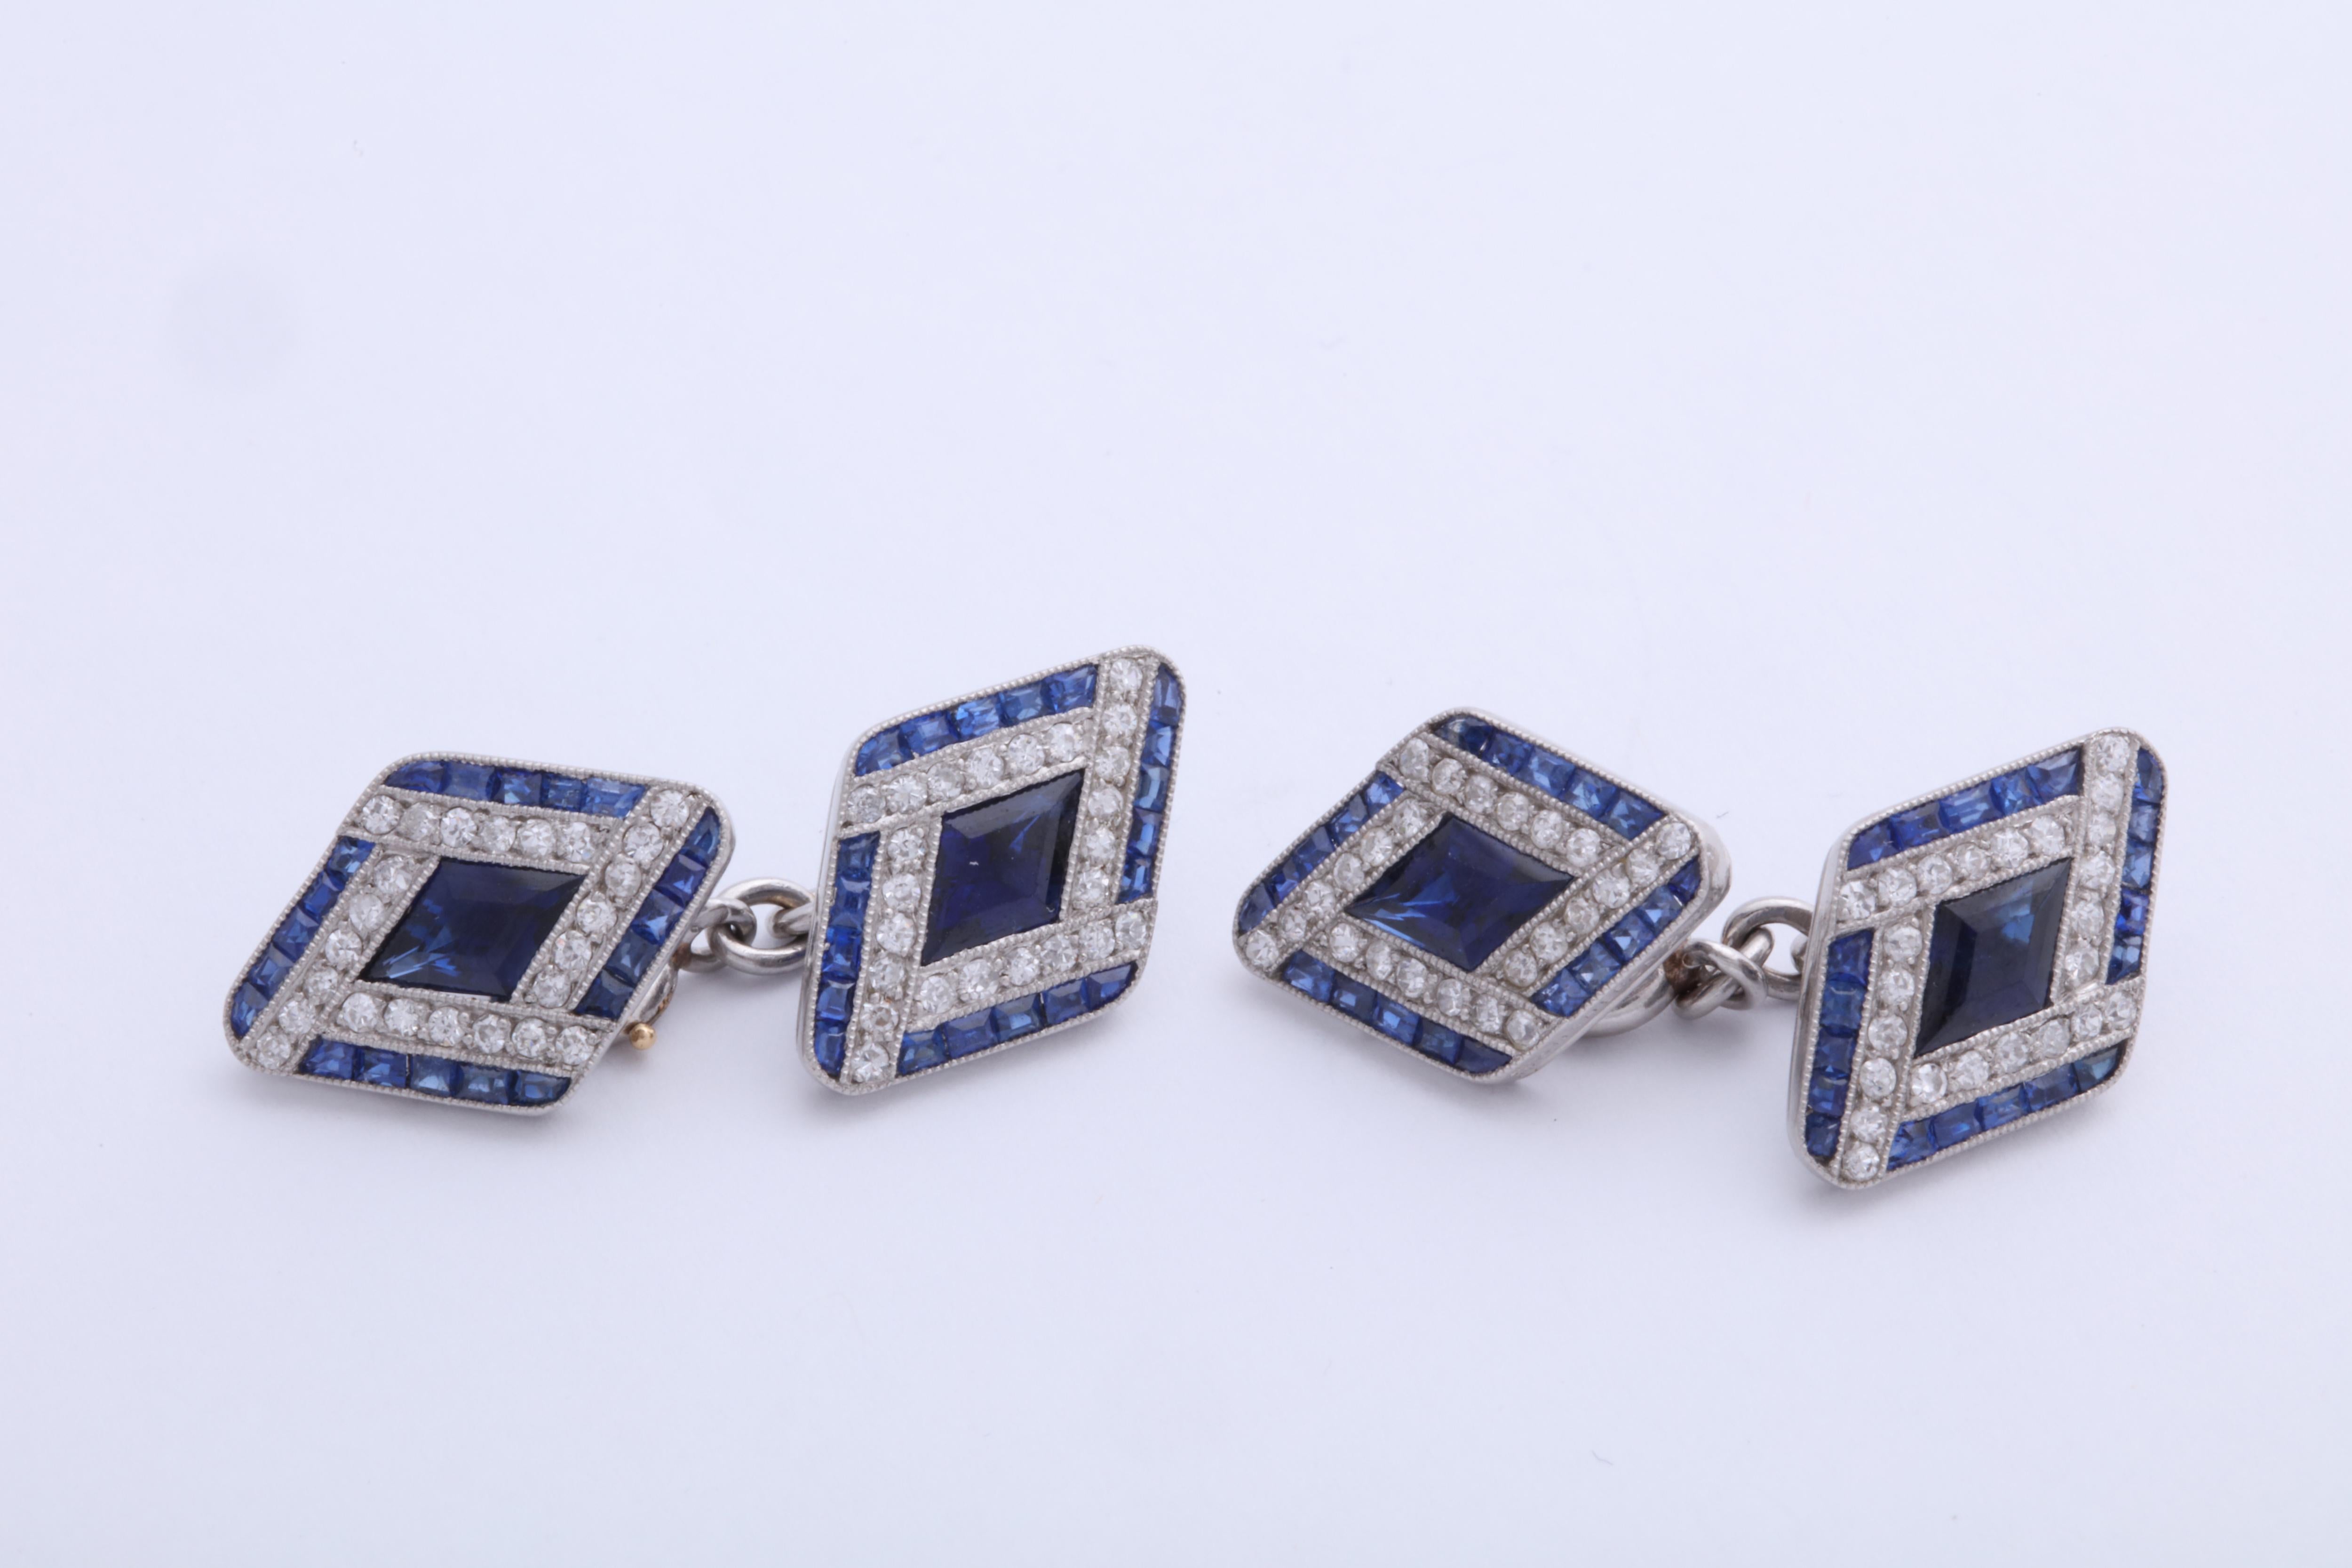 Sapphires and diamonds set in platinum. Signed Boucheron. French. c. 1925